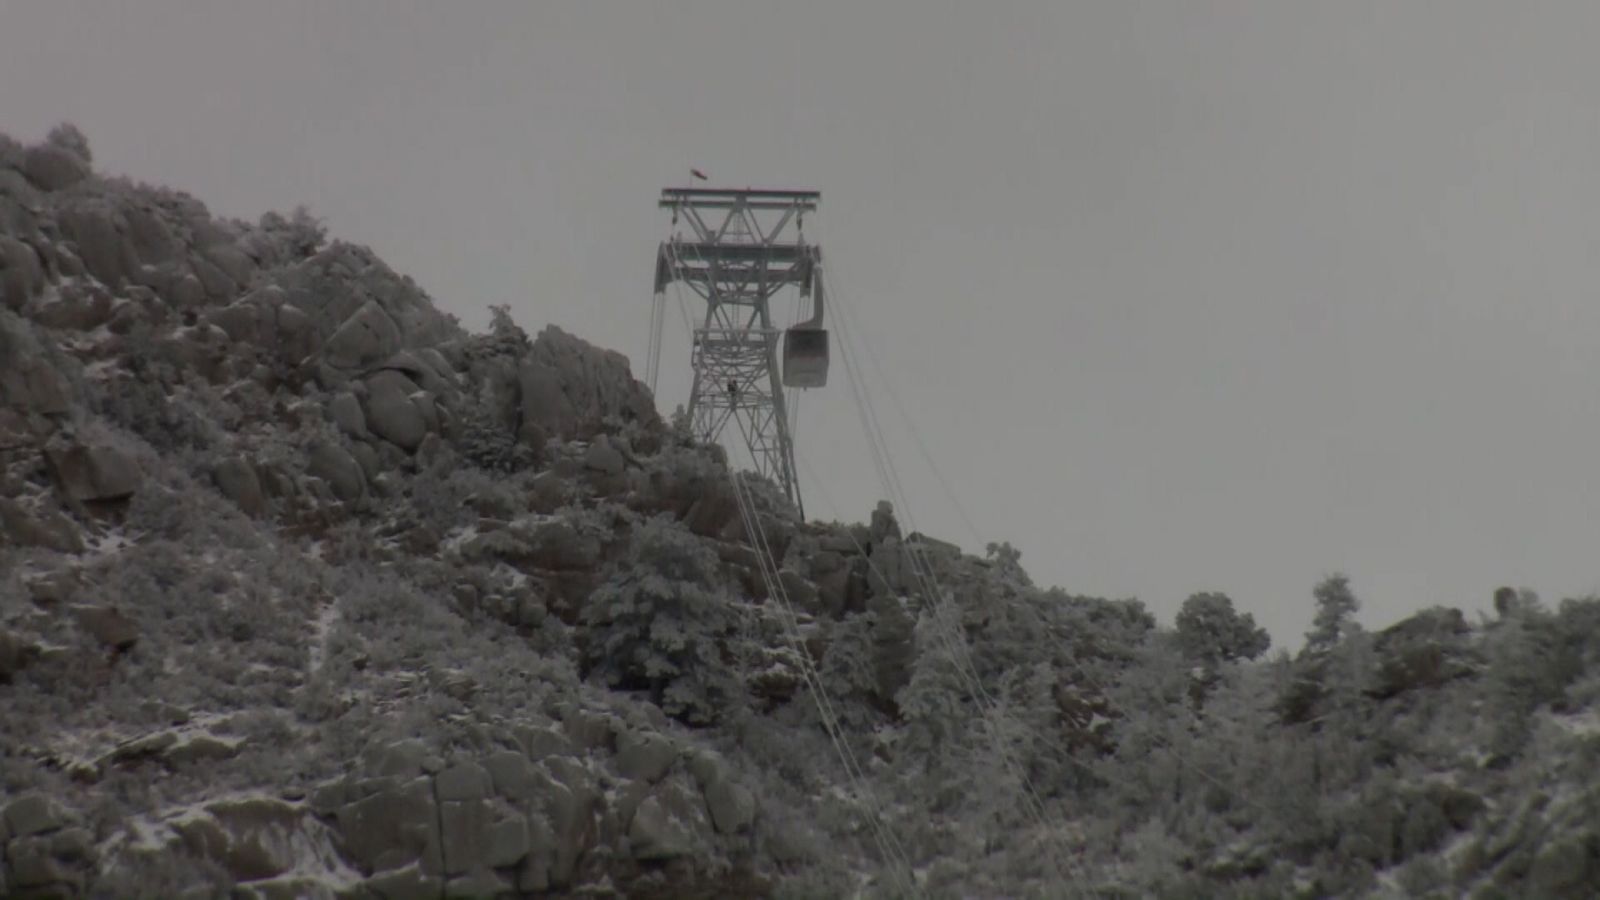 21 people rescued after being trapped overnight on New Mexico